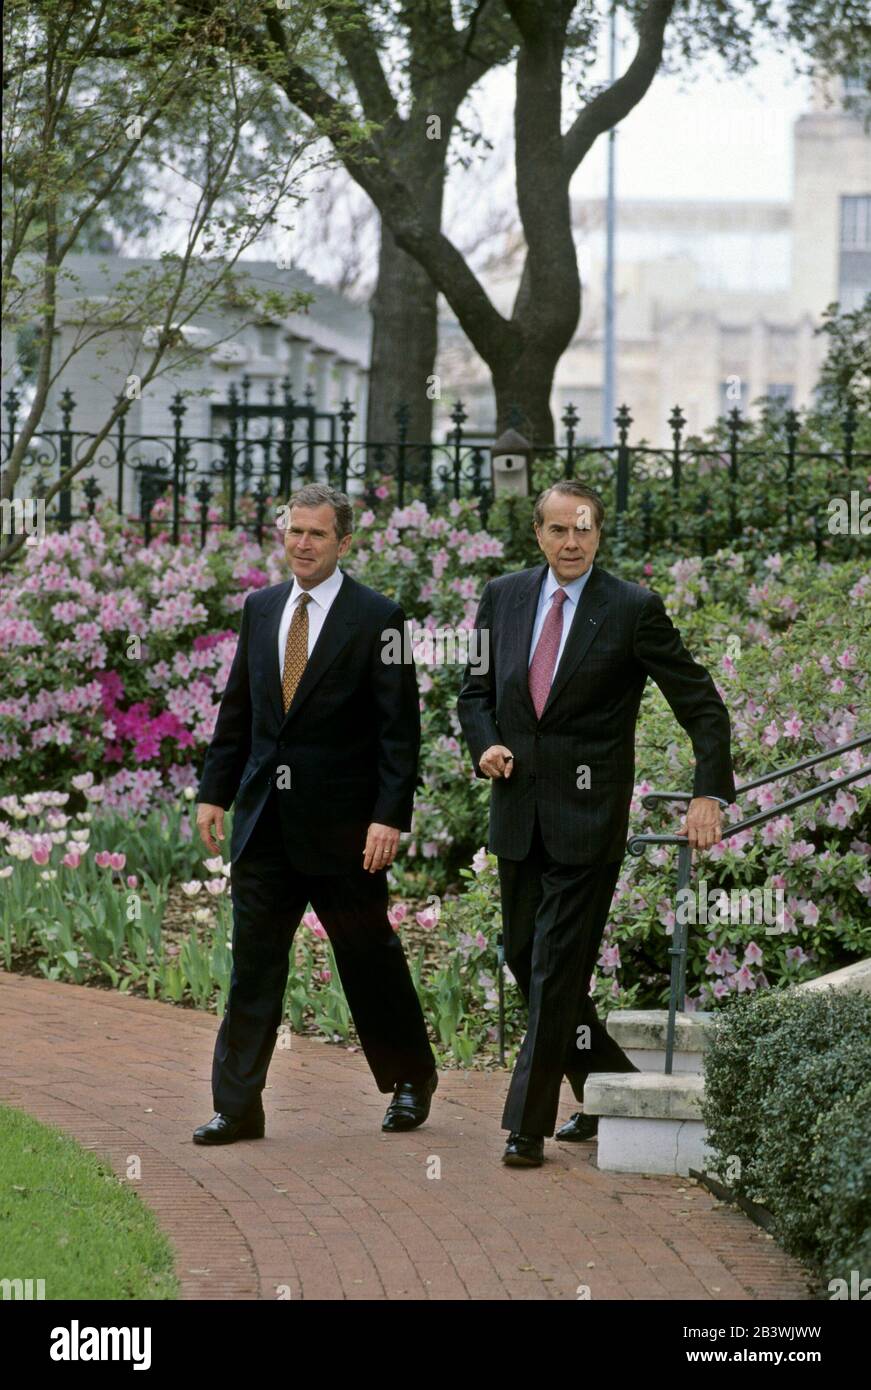 Austin Texas USA, March 6, 1996: After a meeting at the Texas Governor's Mansion, presidential hopeful Bob Dole (right) wins endorsement of Texas Gov. George W. Bush in the Republican primary.  ©Bob Daemmrich Stock Photo